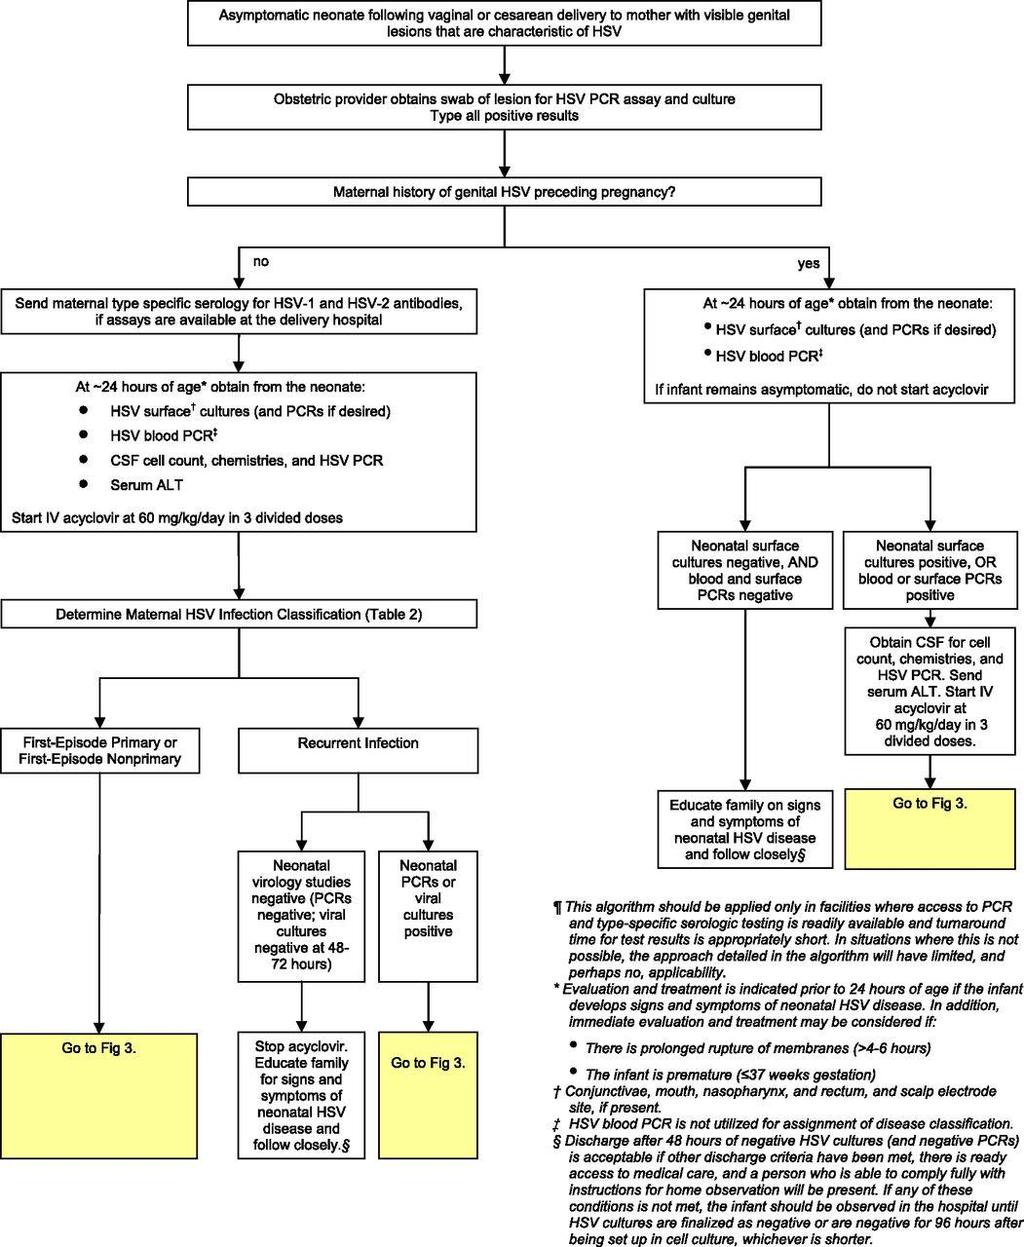 Algorithm for the evaluation of asymptomatic neonates after vaginal or caesarean delivery to women with active